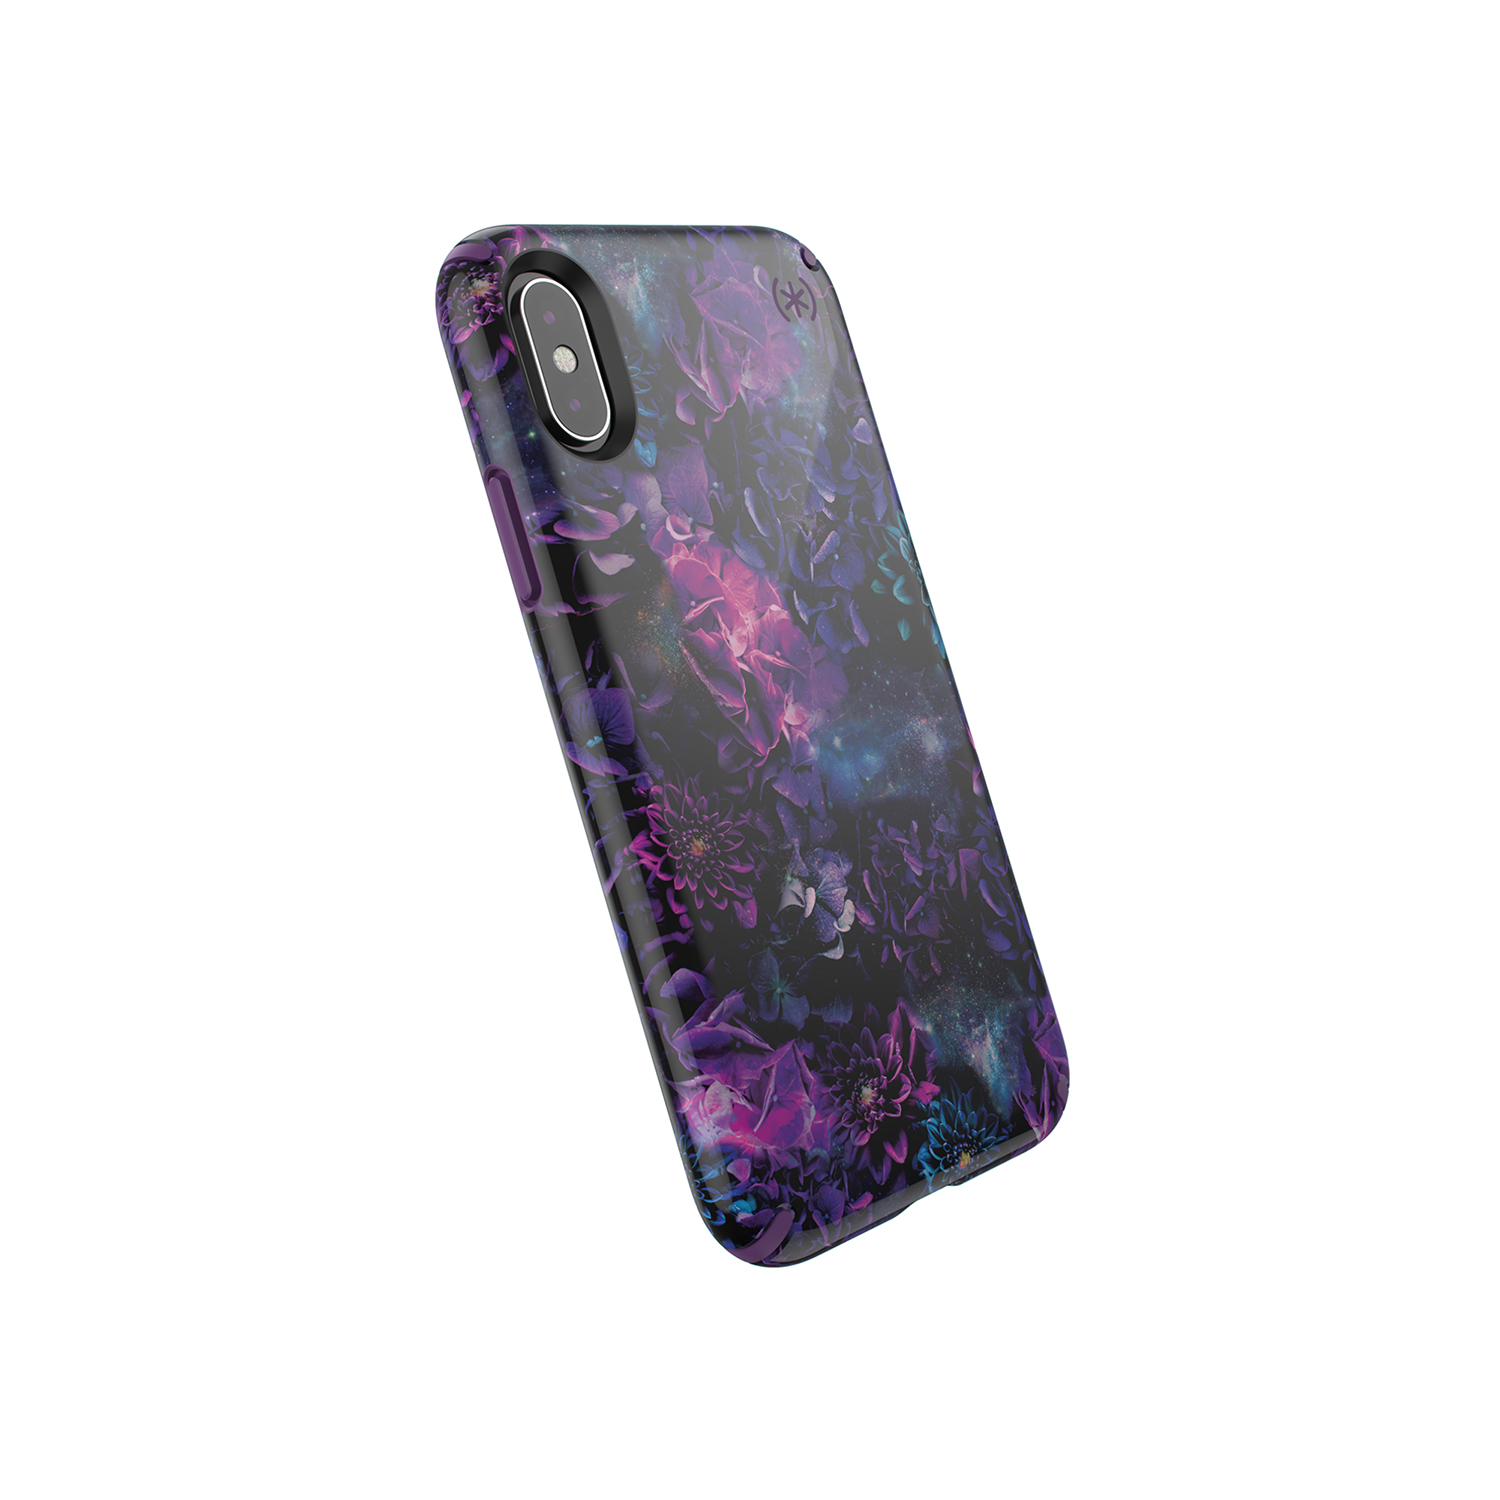 Presidio INKED Galaxy Floral case for iPhone XS